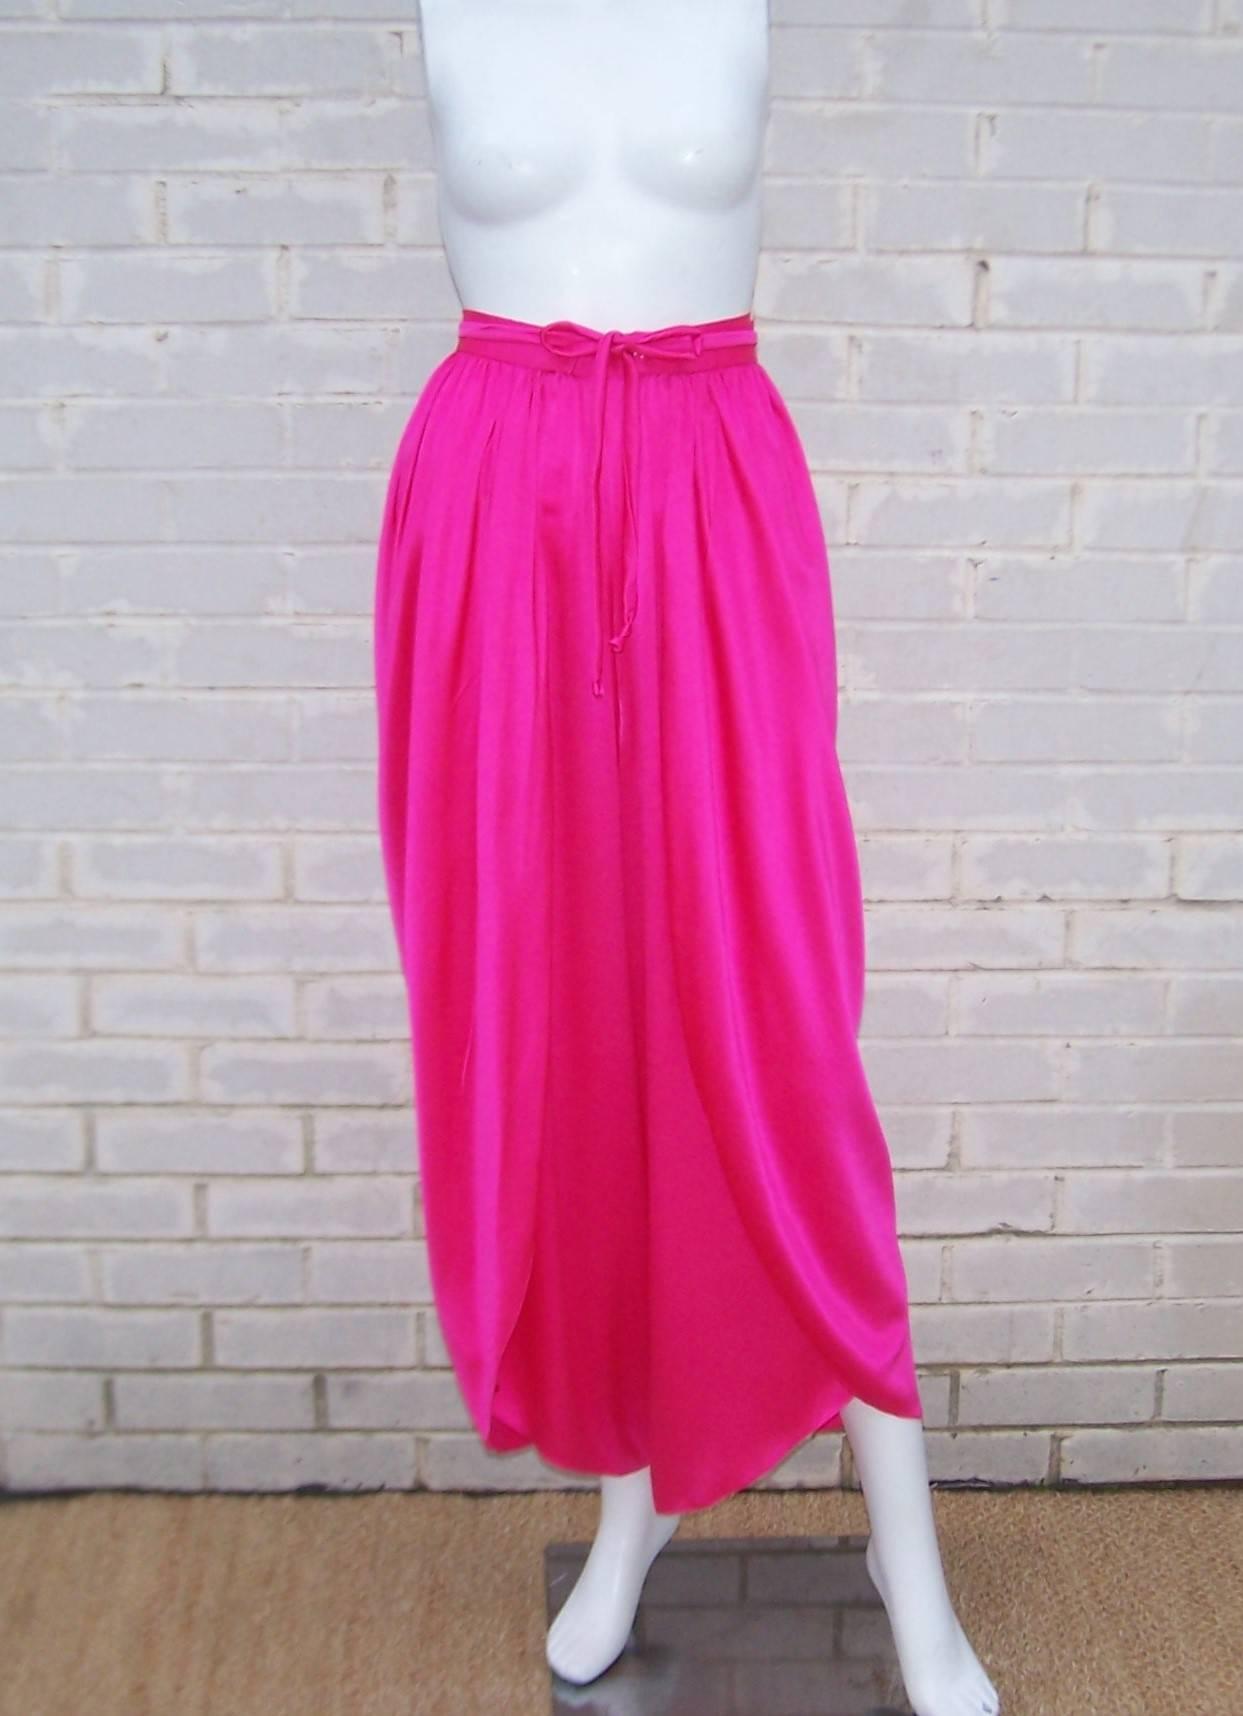 You could say these are 'haute' pink AND hot pink!  These silk charmeuse harem style pants are a fun way to spice up your summer wardrobe.  They are basically constructed like a diaper with two waistbands...one wraps to the back and the second wraps